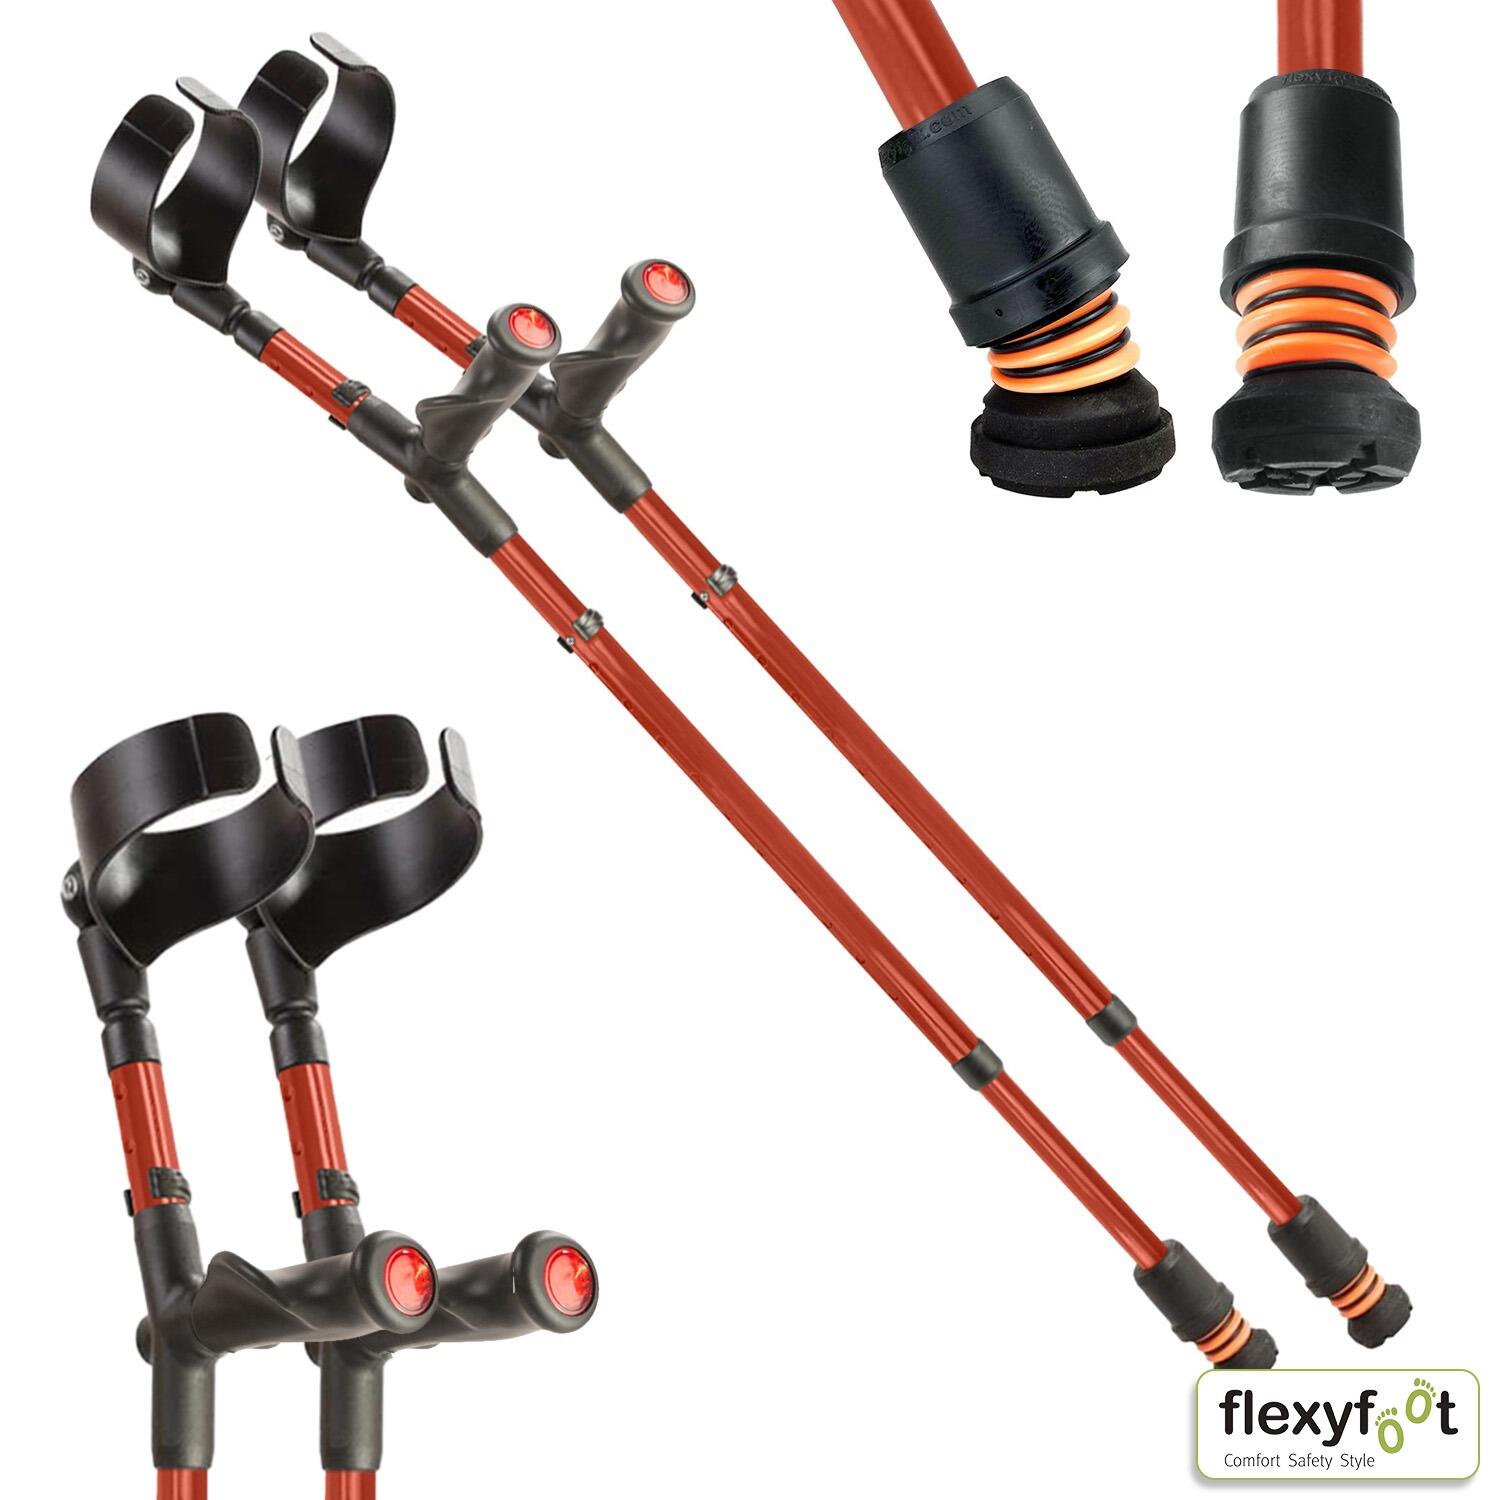 A pair of red Flexyfoot Comfort Grip Double Adjustable Crutches